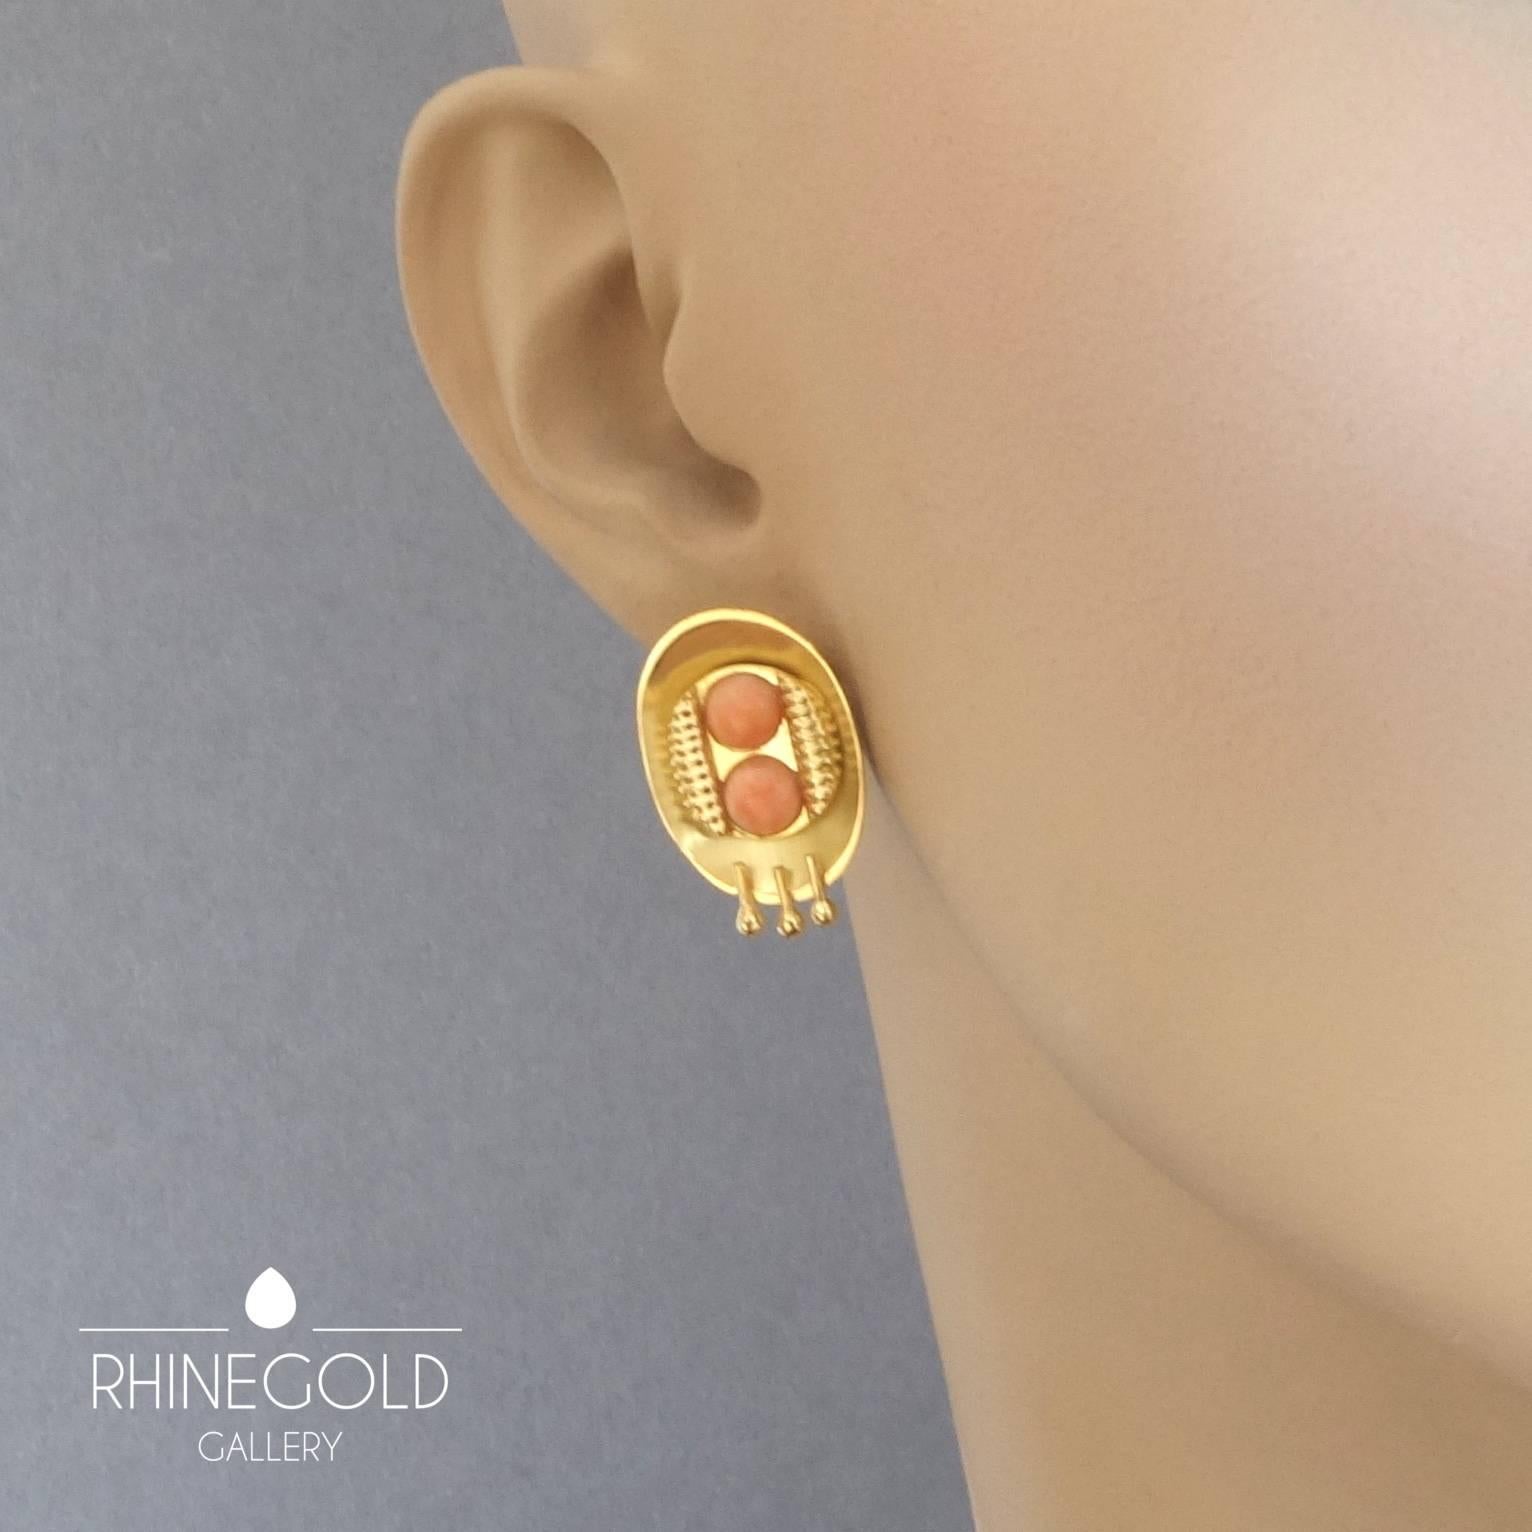 1990s Postmodernist Angel Skin Coral Gold Clip-on Earrings
18k yellow gold, angel skin coral
Height 2.75 cm, width 1.7 cm (approx. 1 1/16” by 11/16”)
Weight approx. 15.8 grams
Marks: gold content mark ‘750’ for 18k gold
Germany, 1990s

A touch of